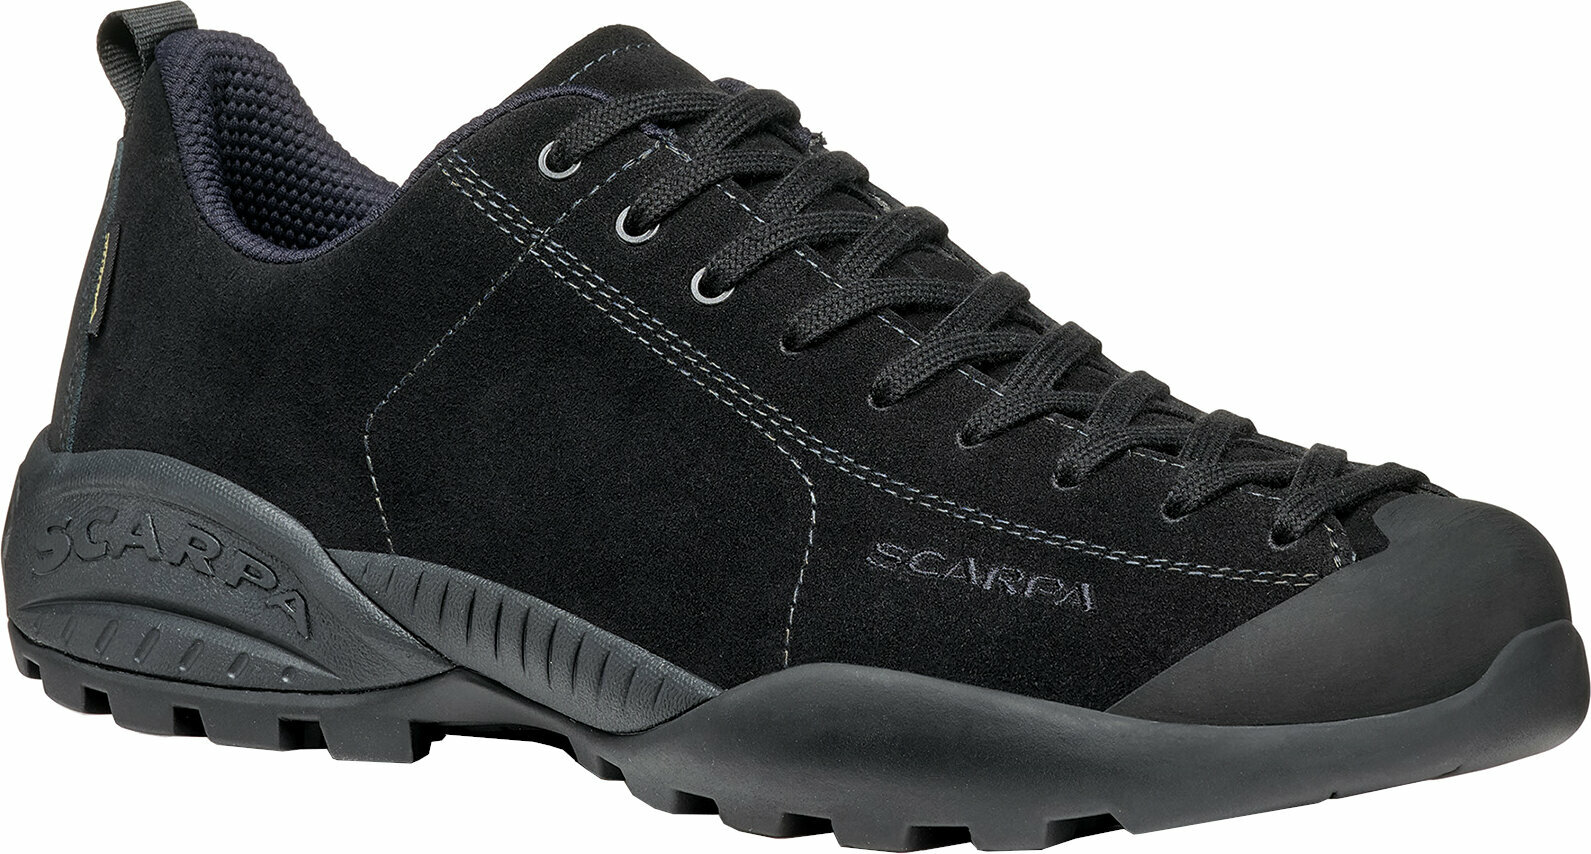 Chaussures outdoor hommes Scarpa Mojito GTX Black 43 Chaussures outdoor hommes